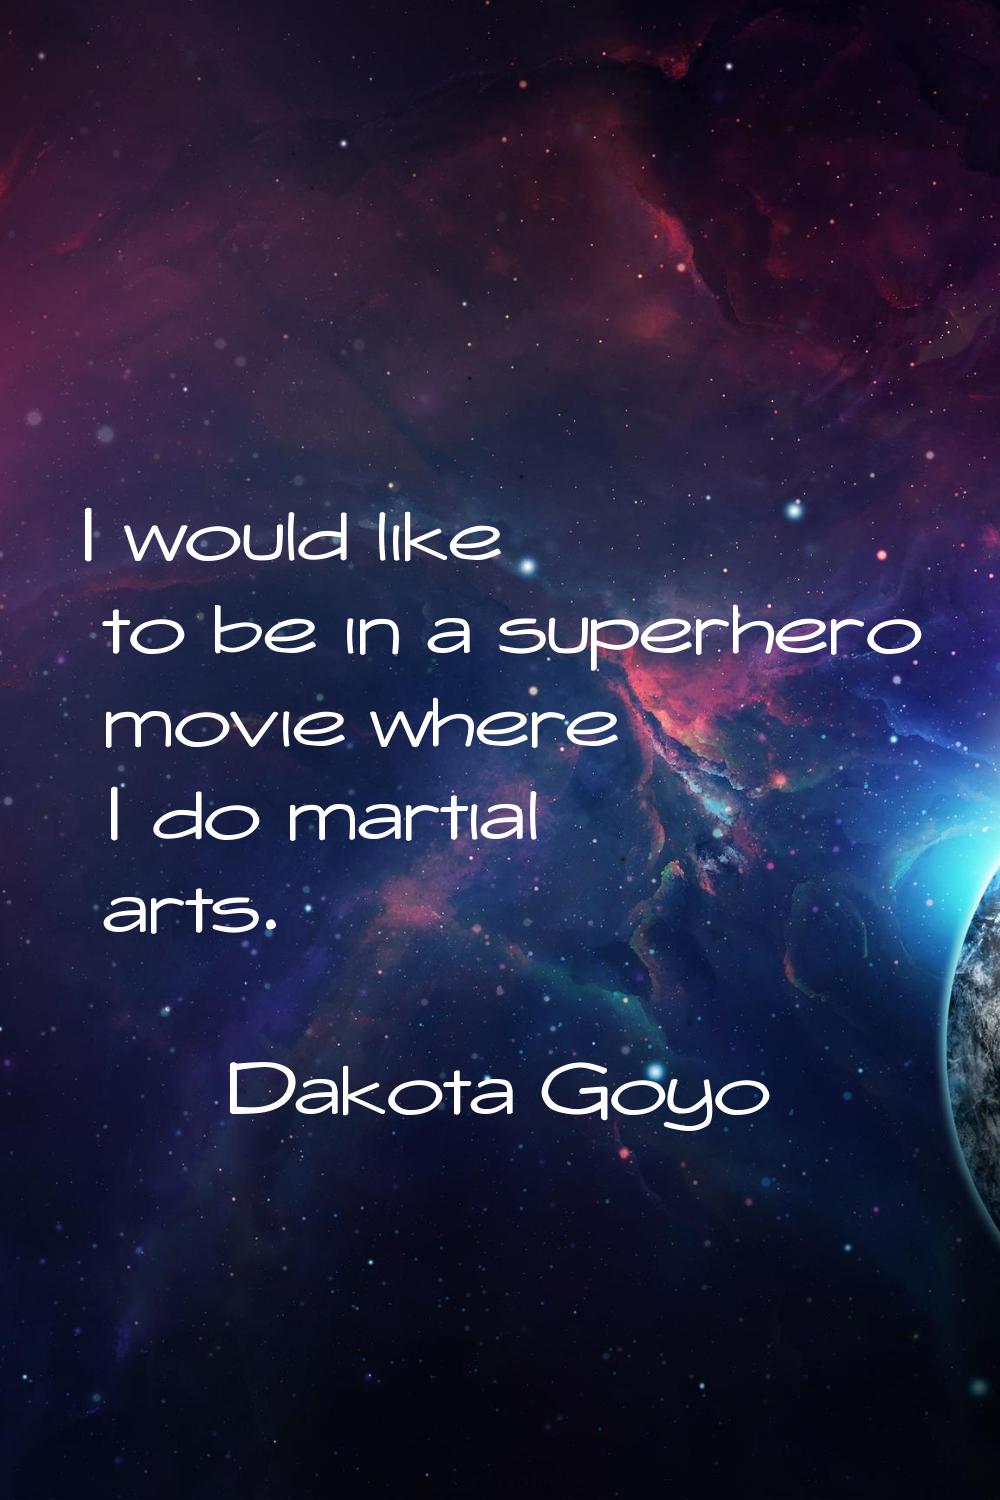 I would like to be in a superhero movie where I do martial arts.